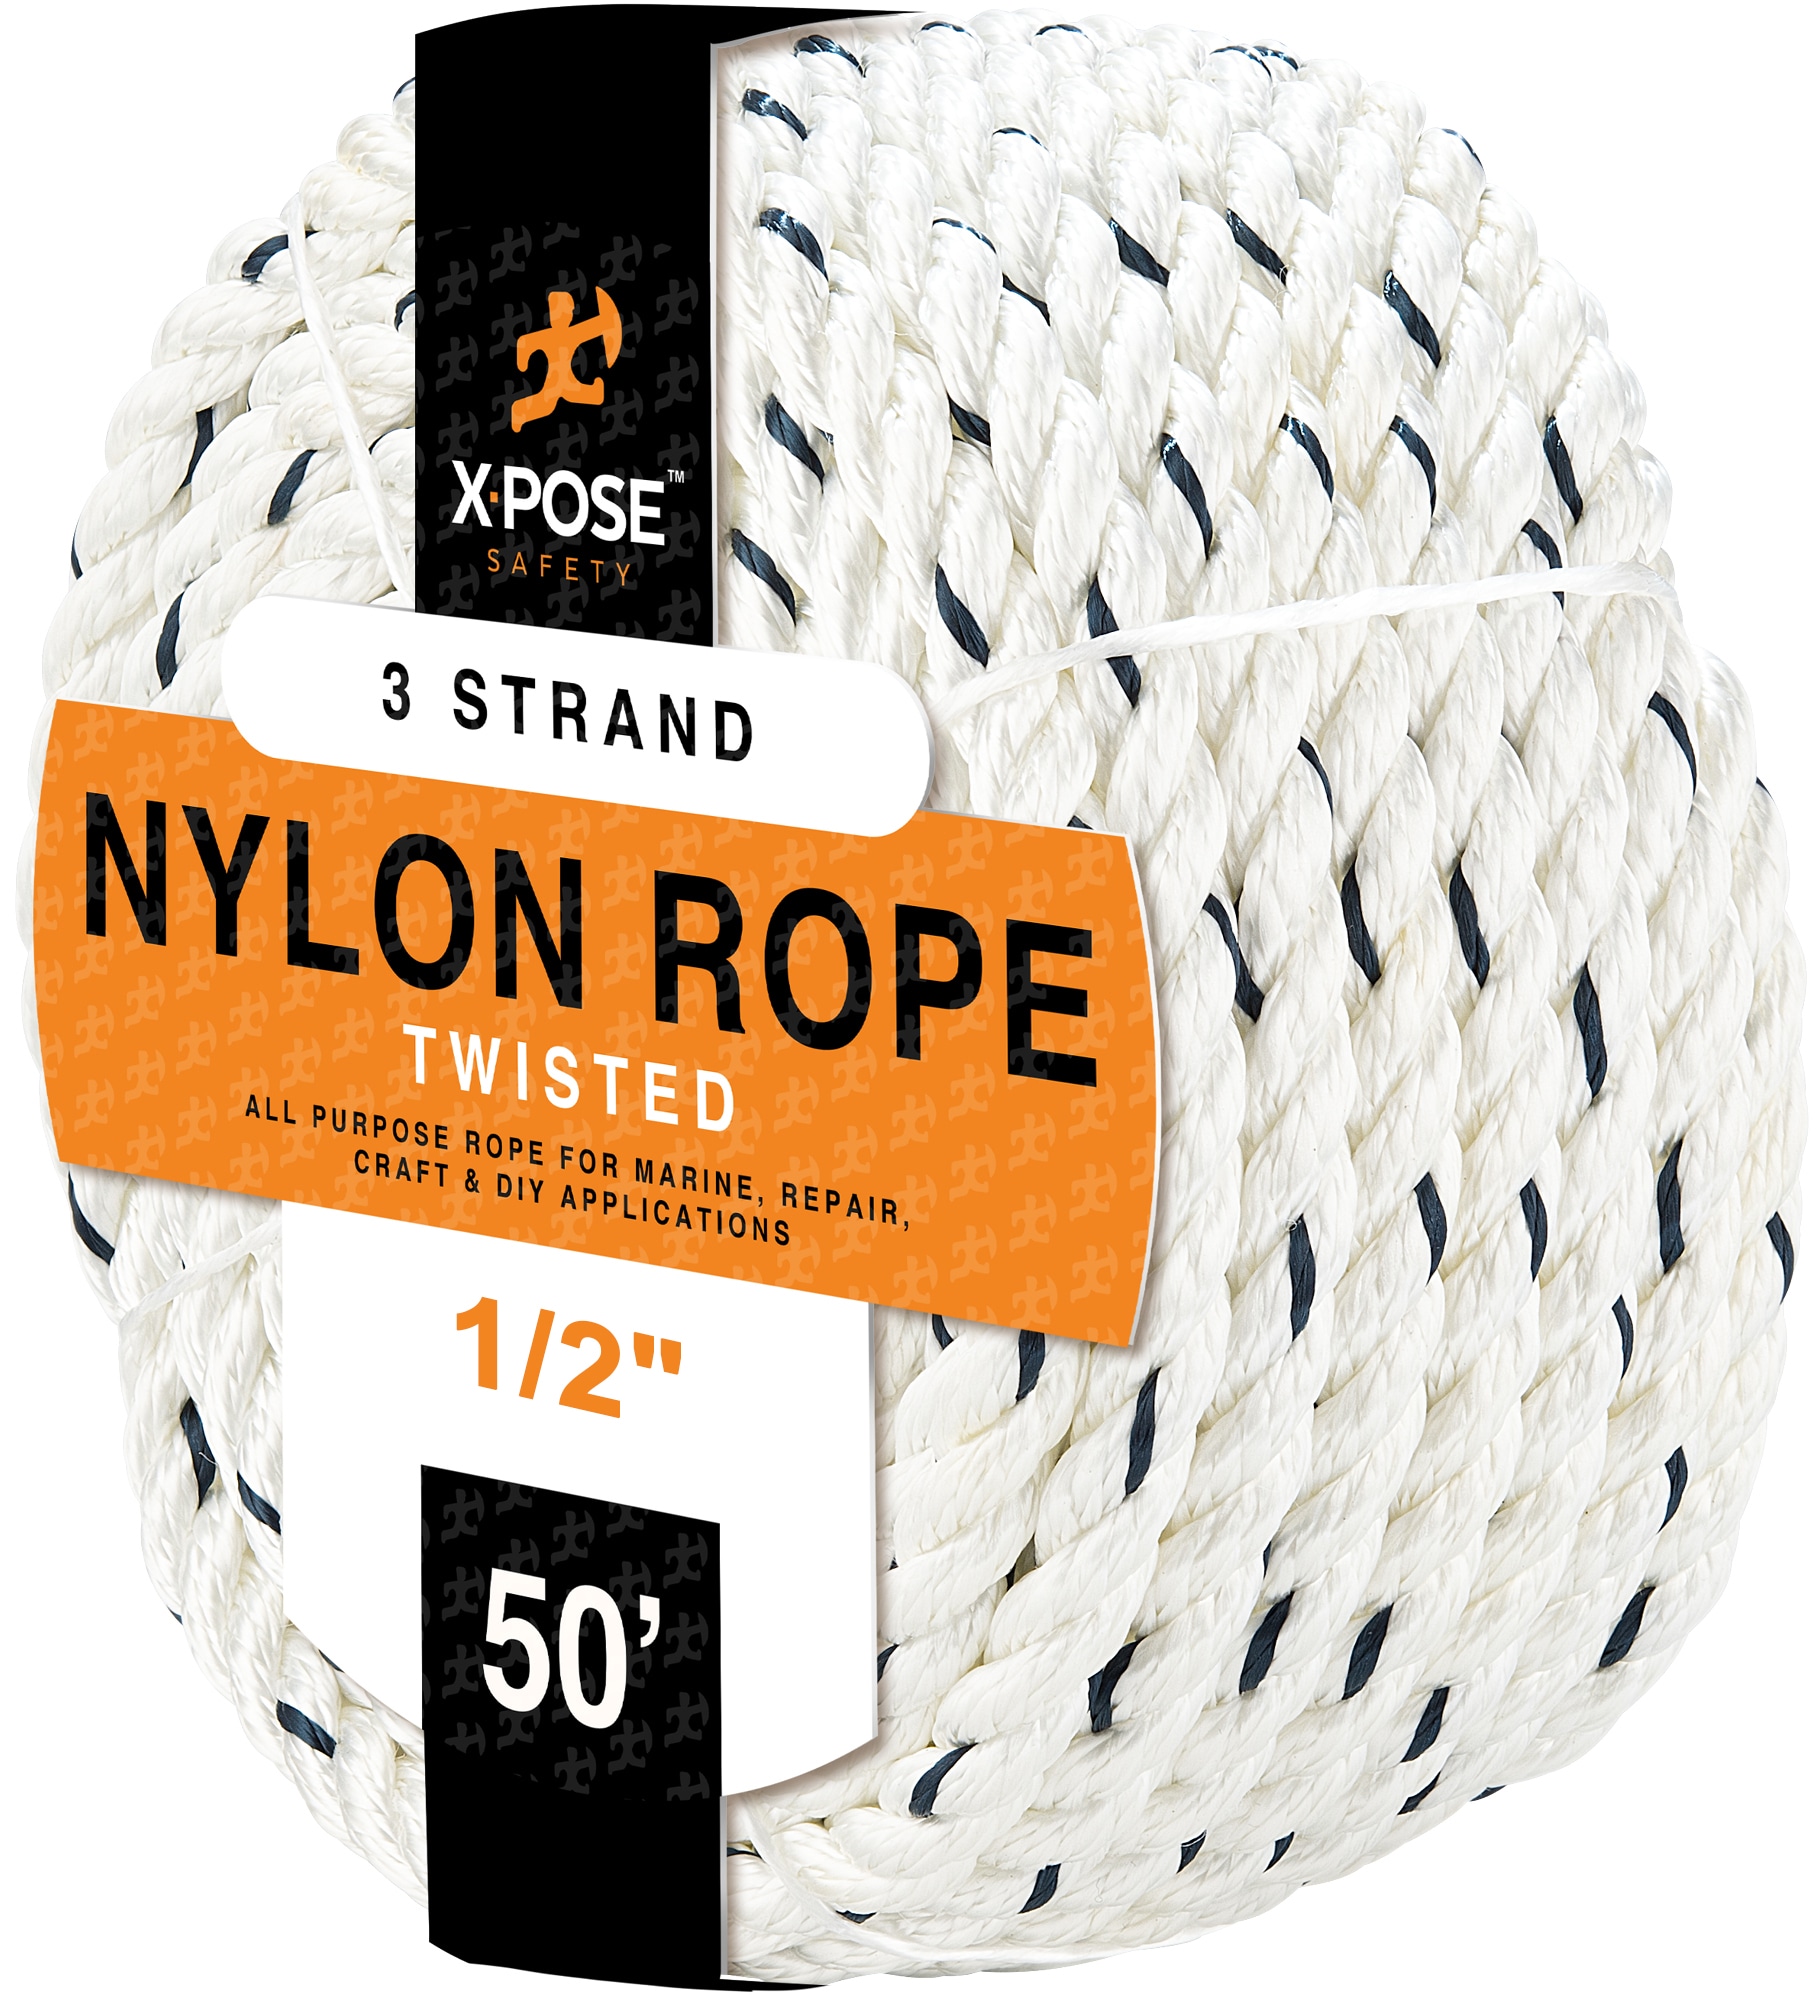 XPOSE SAFETY Nylon Poly Rope - 1/2 Inch Polyester and Nylon Rope 50 Ft - Up  to 10x Stronger Compared Natural Fiber or Polypropylene Rope - Synthetic 3  Strand Braided Rope 